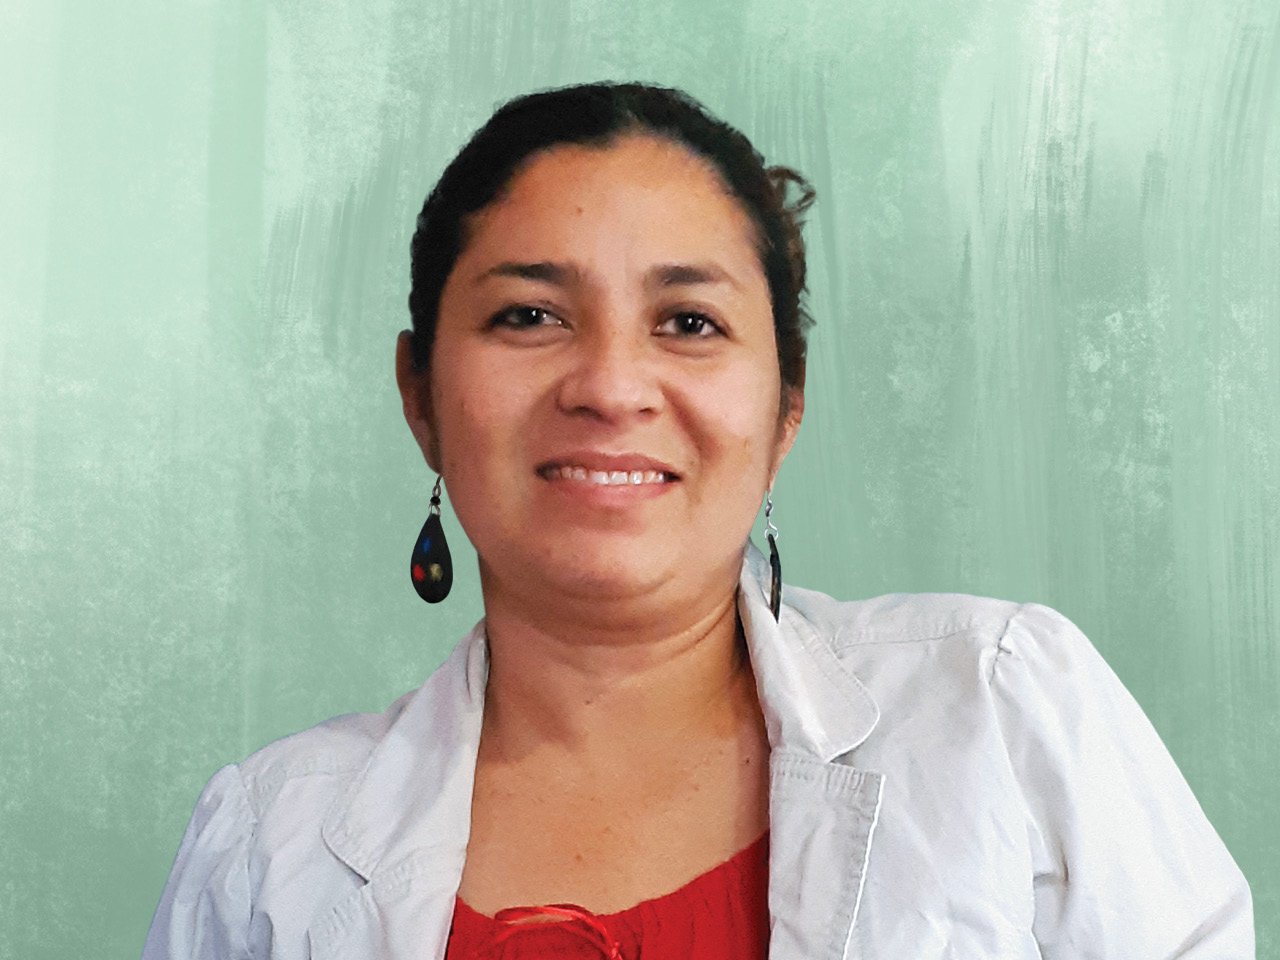 A photo of labour organizer Sonia Aviles on a turquoise background